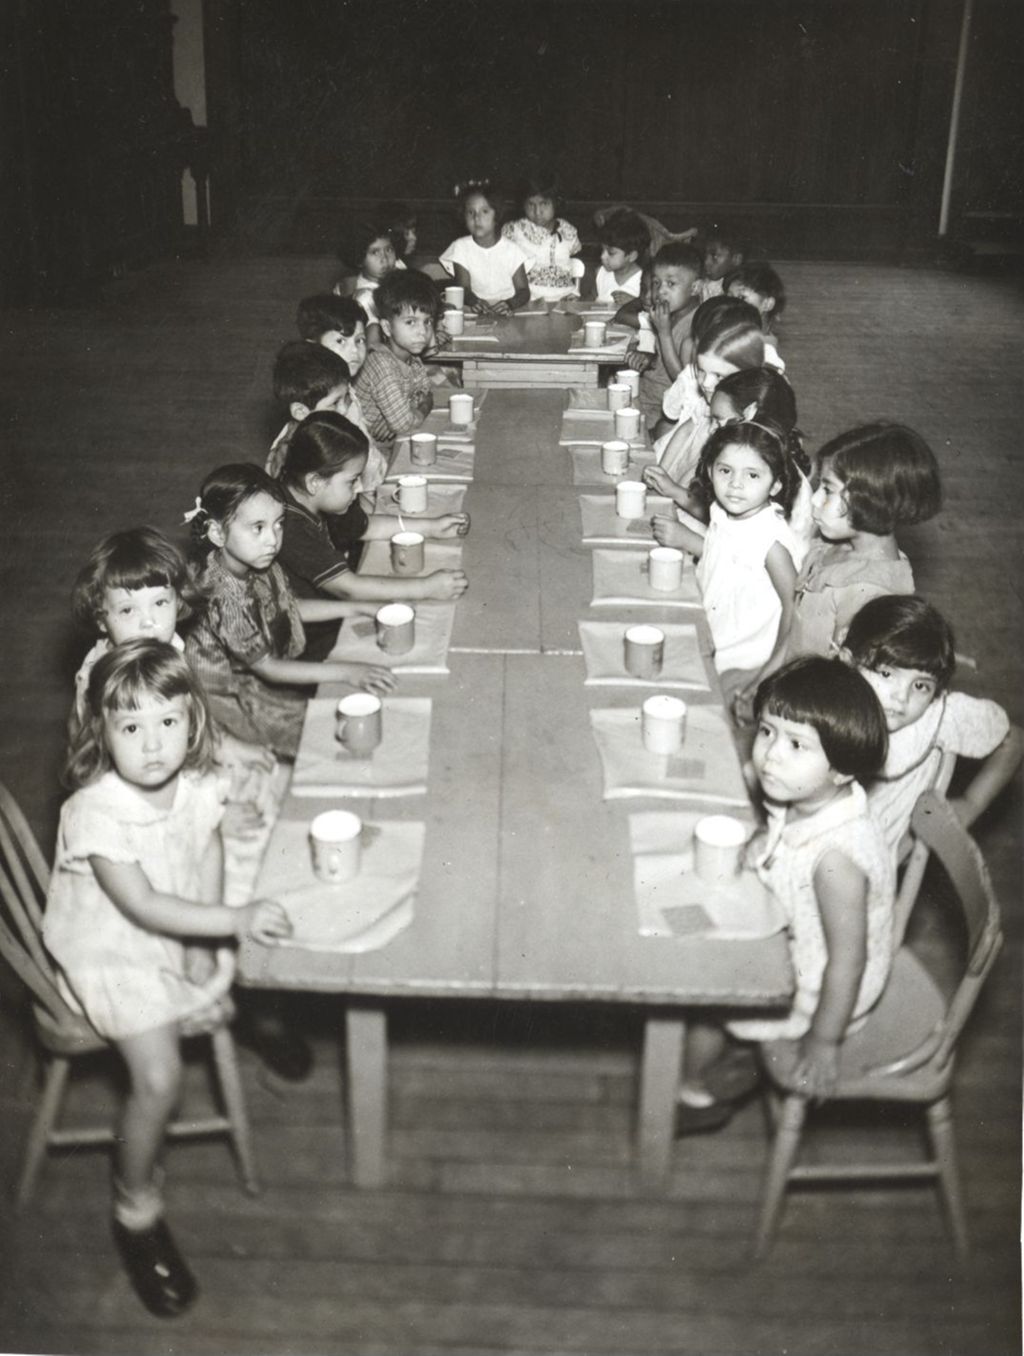 Miniature of Children seated at table waiting for a meal